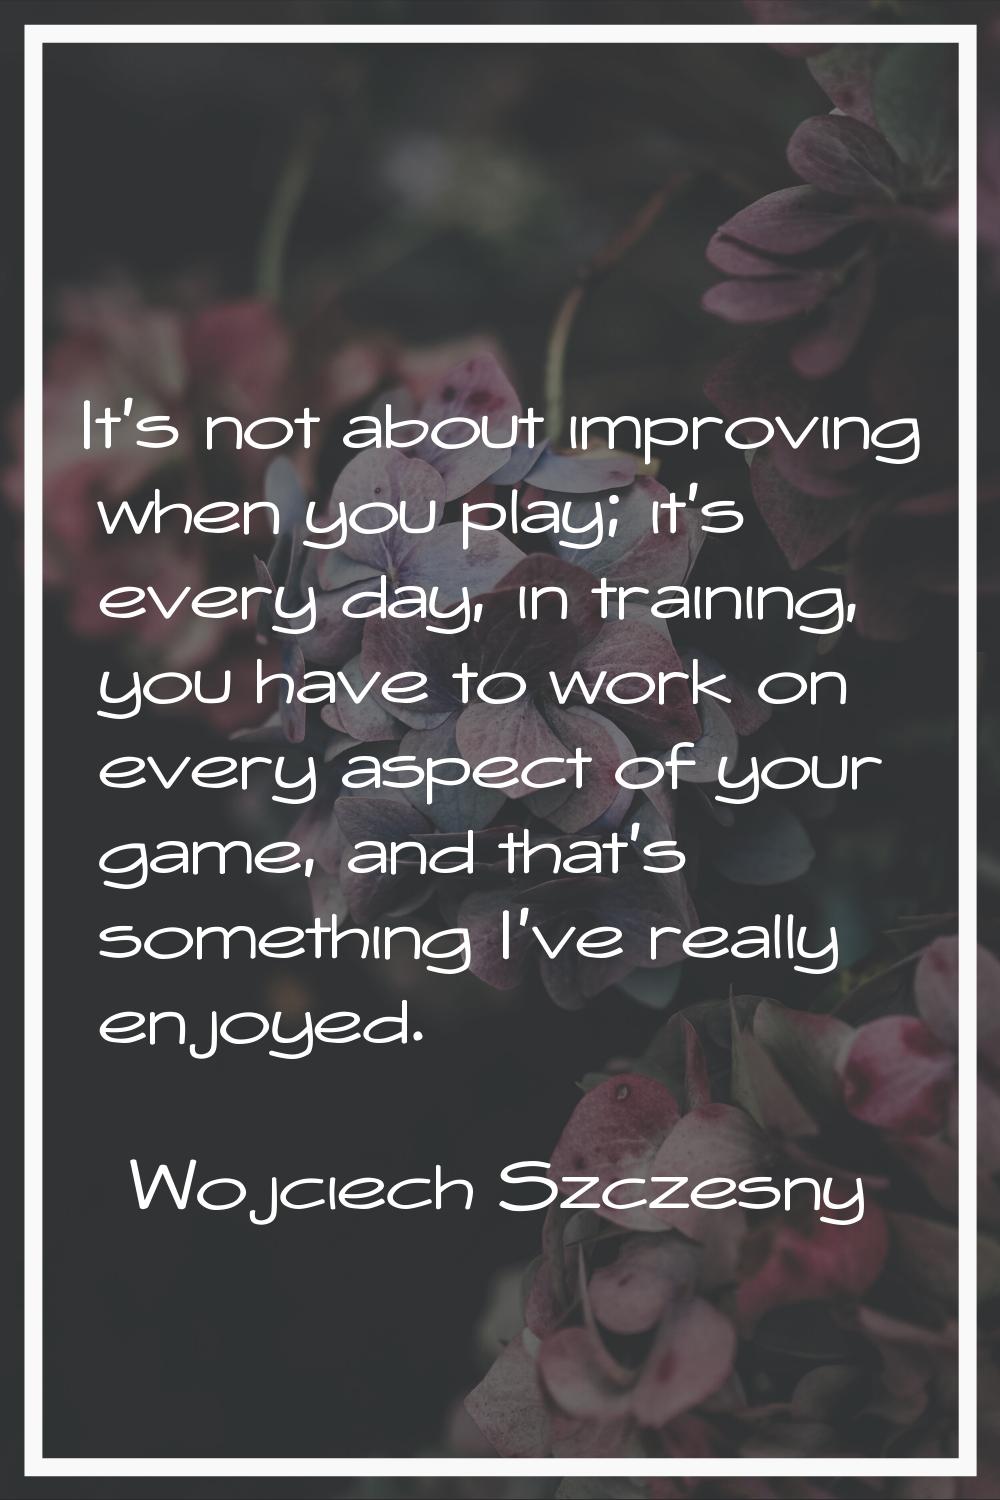 It's not about improving when you play; it's every day, in training, you have to work on every aspe